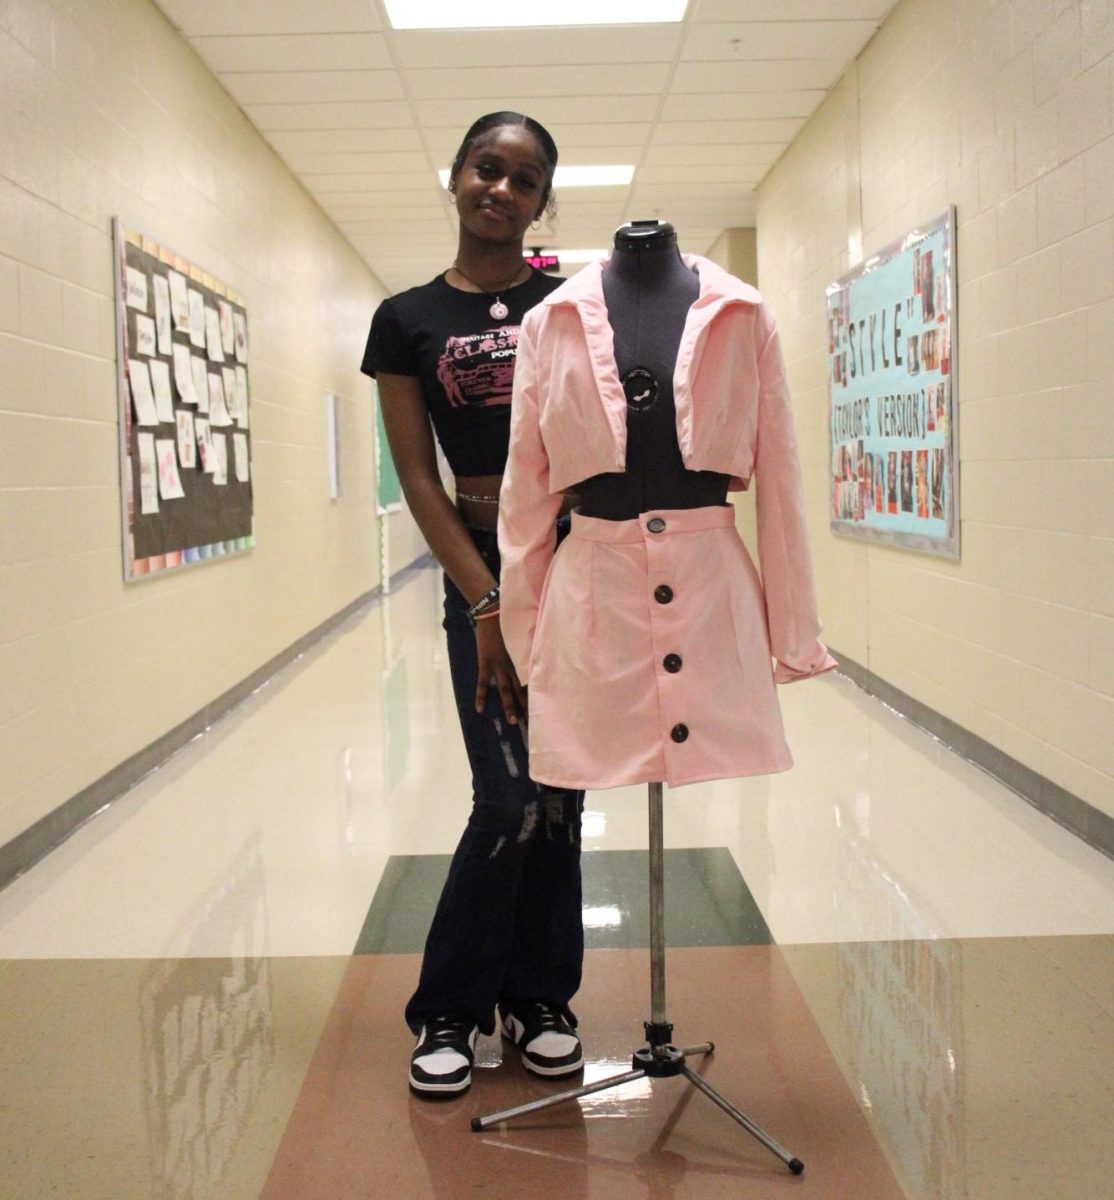 Advanced Fashion Product Development student sophomore Michala Rose and one of the garments she created for class.